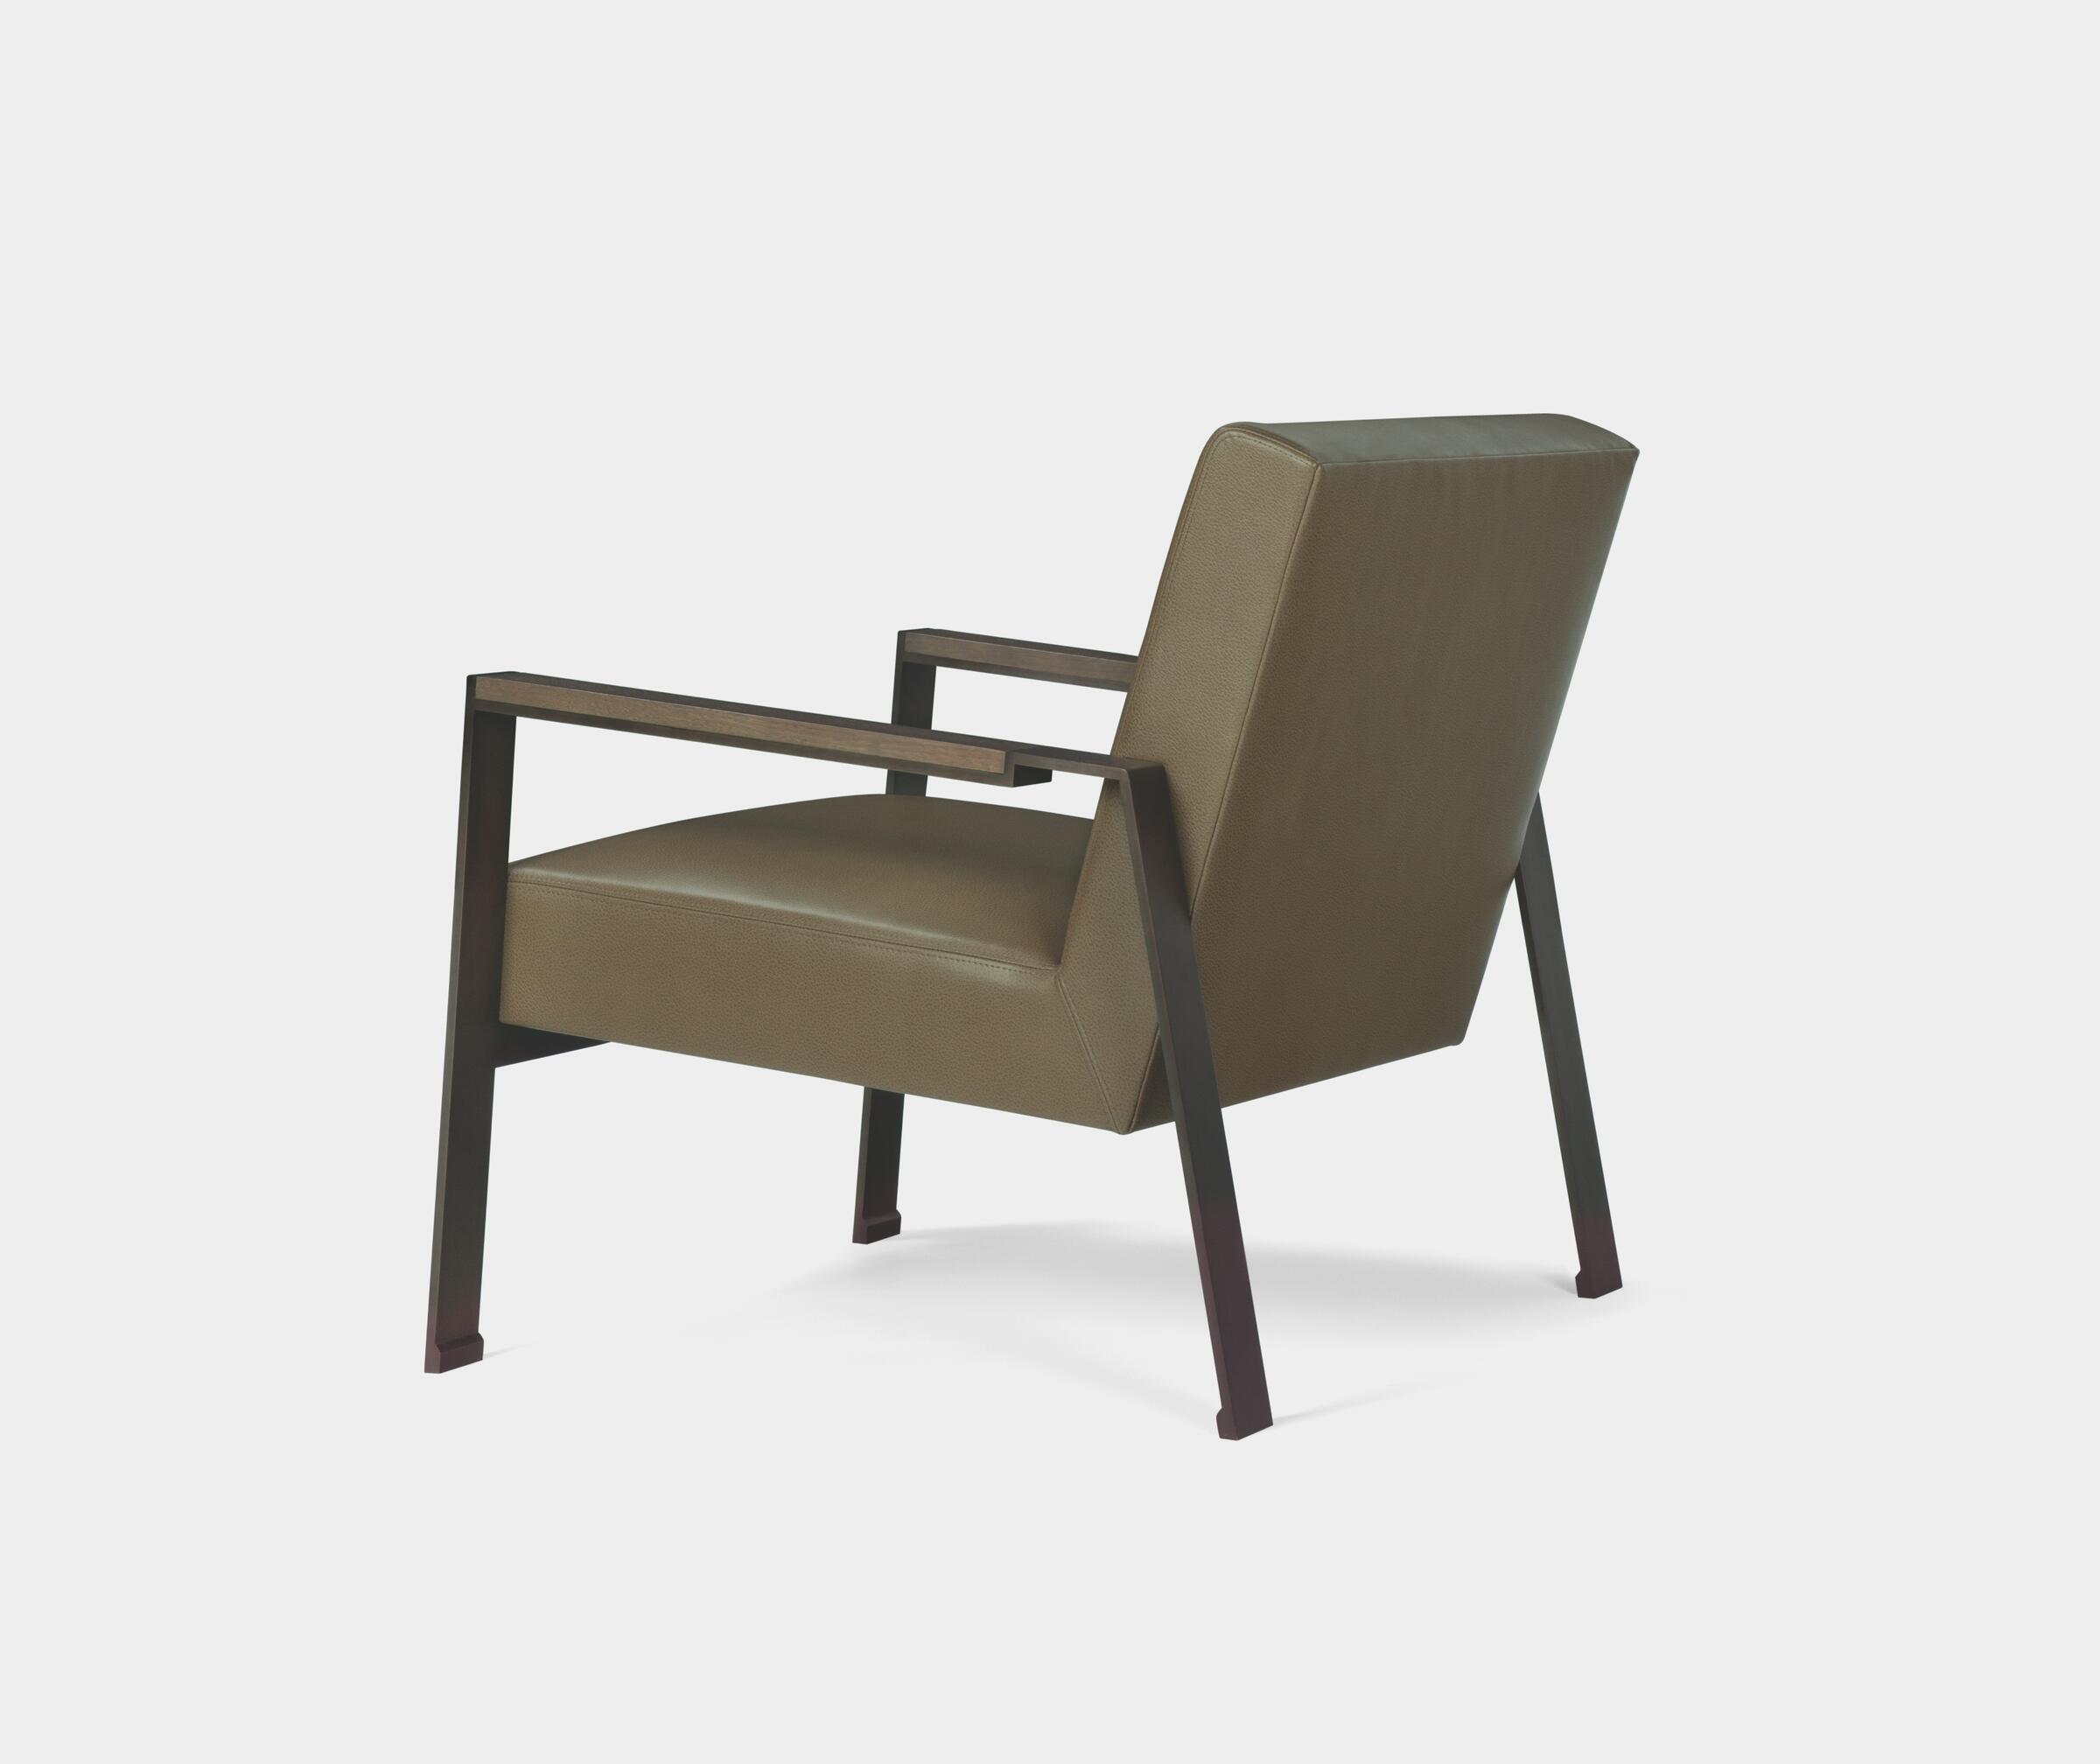 New Linden Lounge Chair